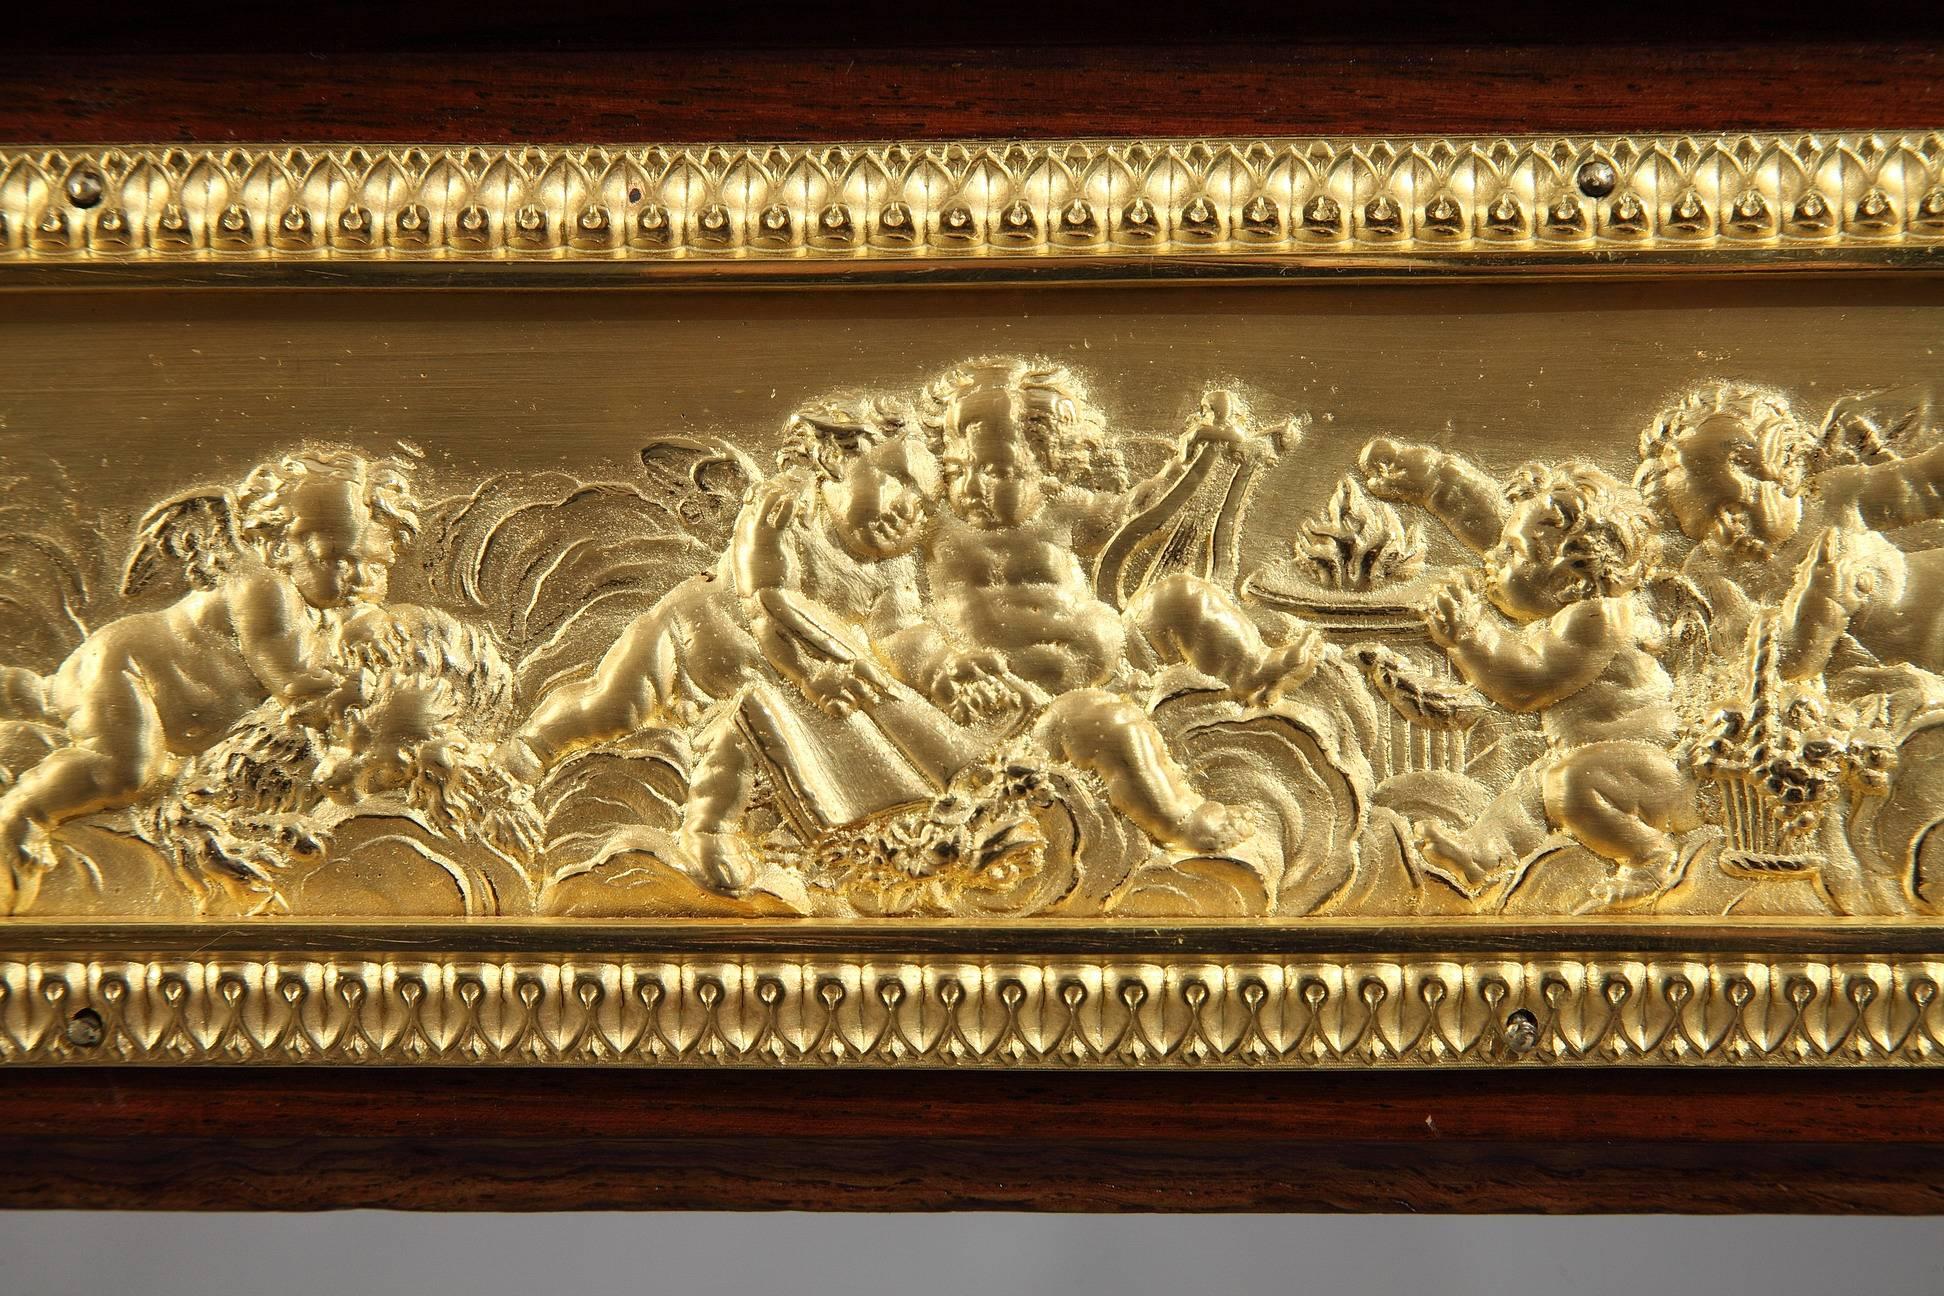 French Marquetry Rolltop Desk after One Commissioned by Marie-Antoinette to Riesener